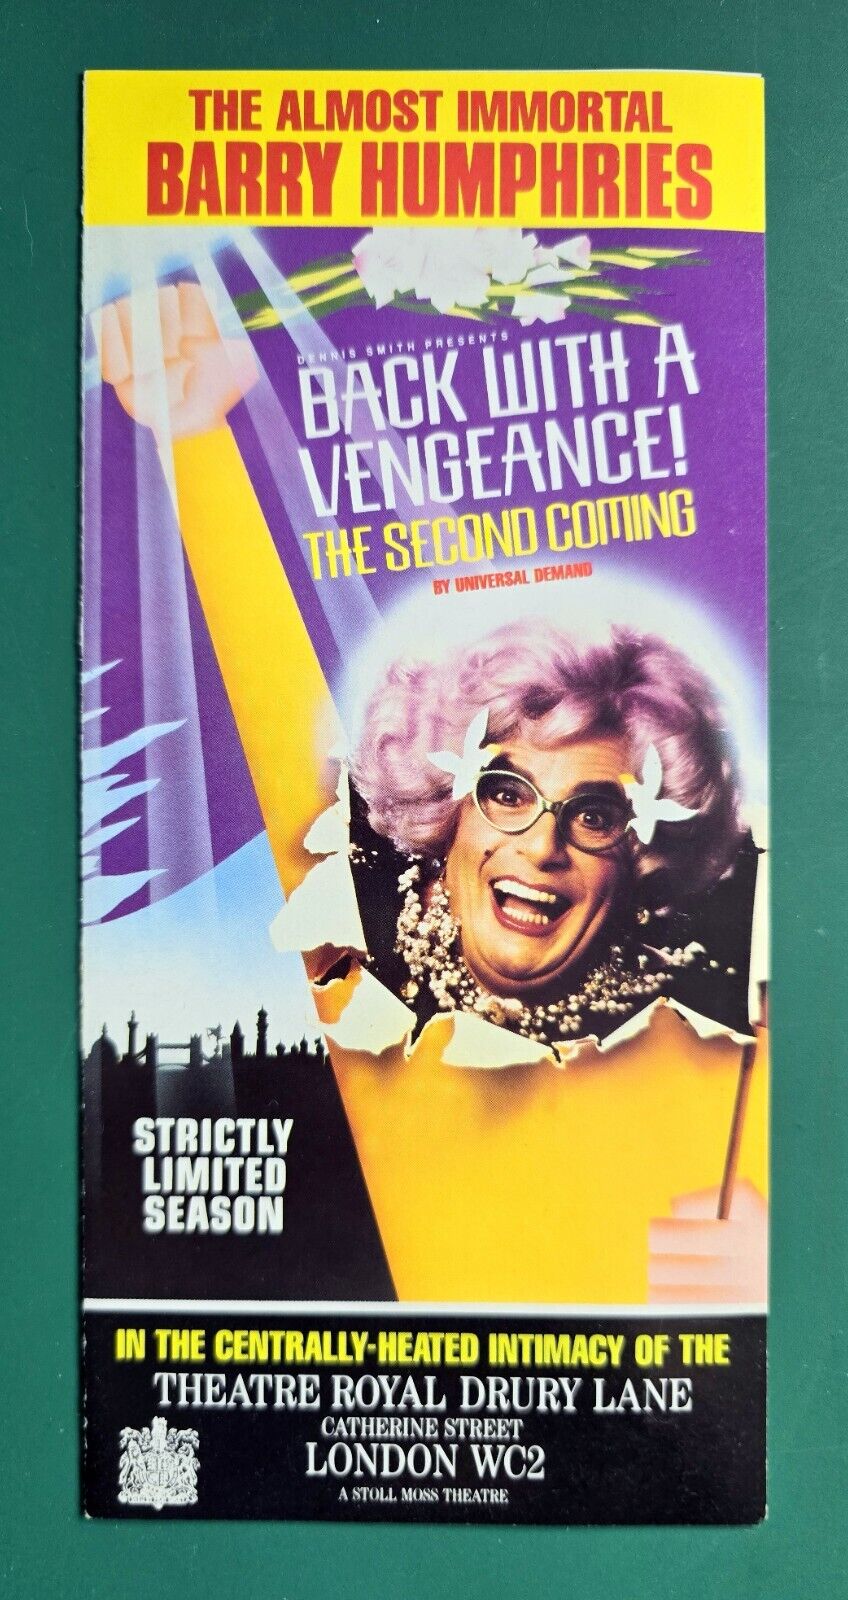 BARRY HUMPHRIES DAME EDNA EVERAGE Back With A Vengeance theatre flyer 1989